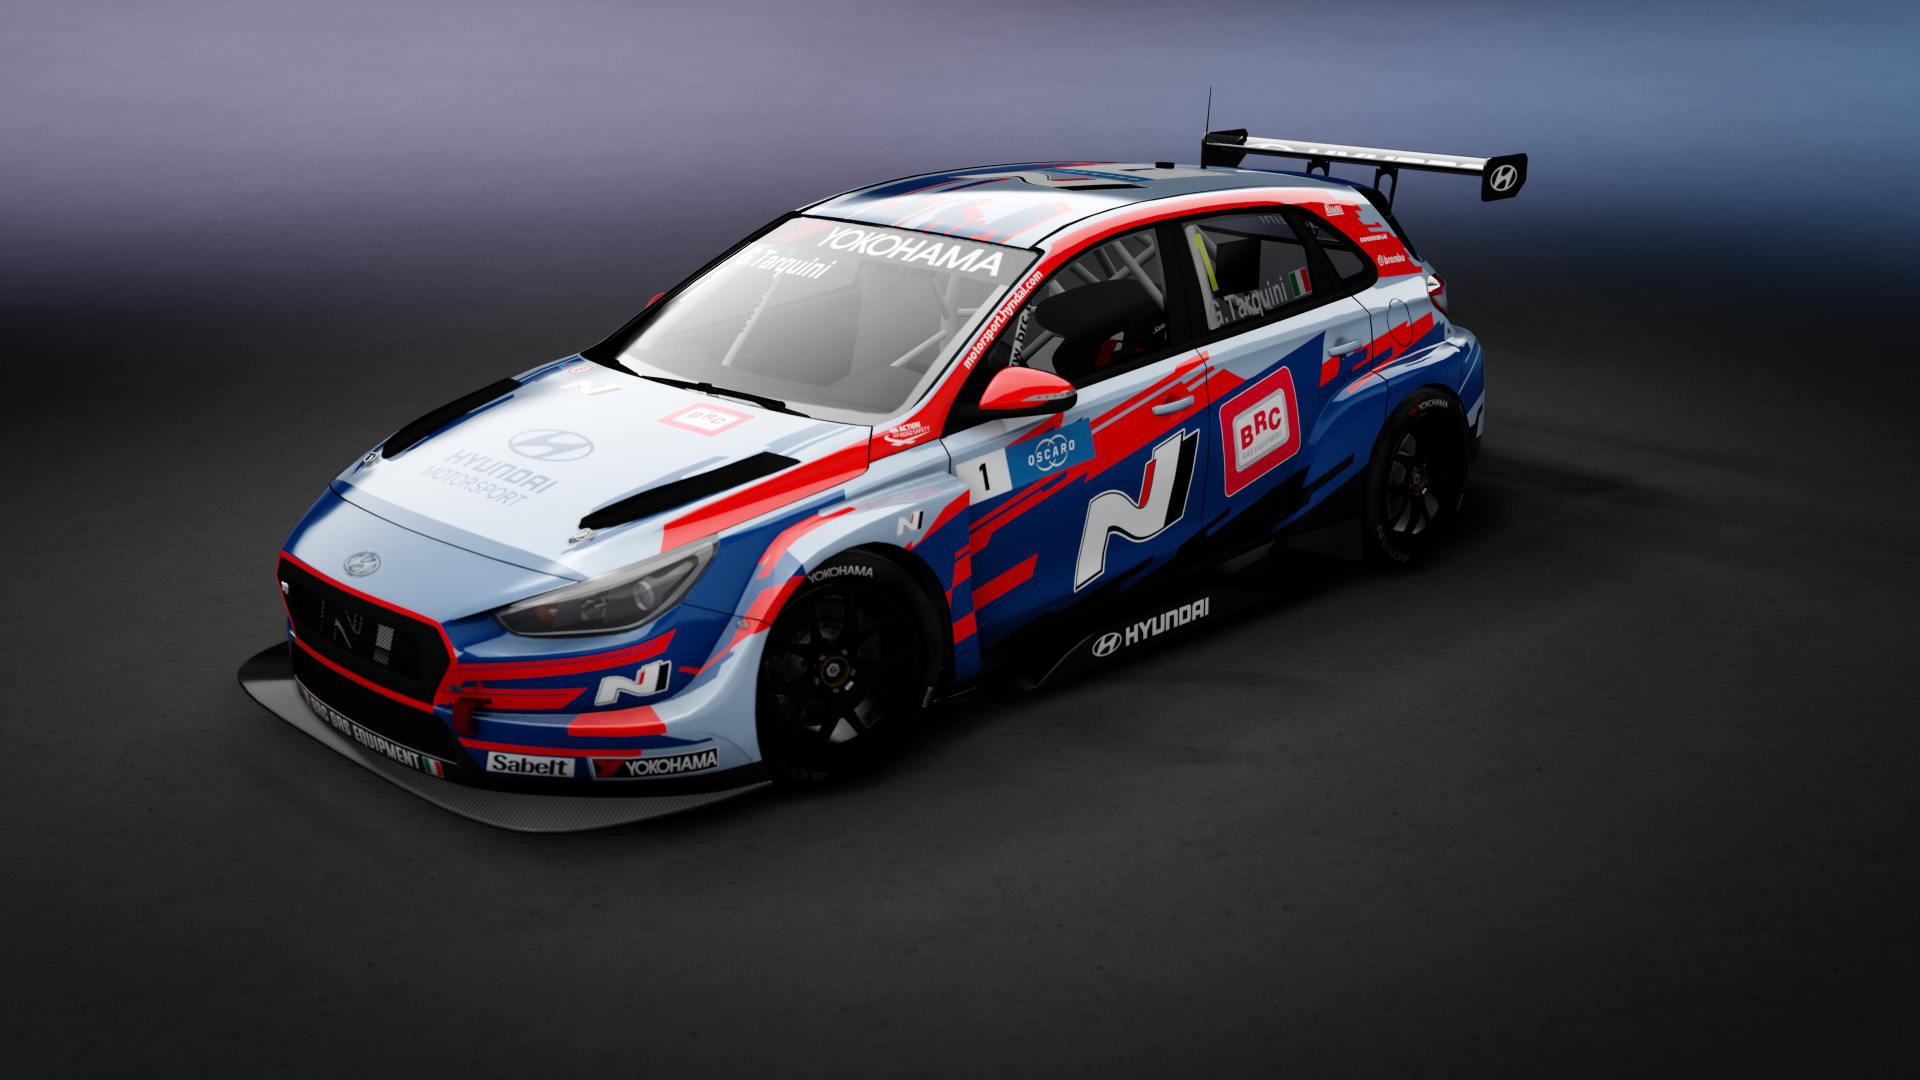 More information about "Assetto Corsa & rFactor 2: TCR 2019 Season mod by Tommy78 aggiornato"